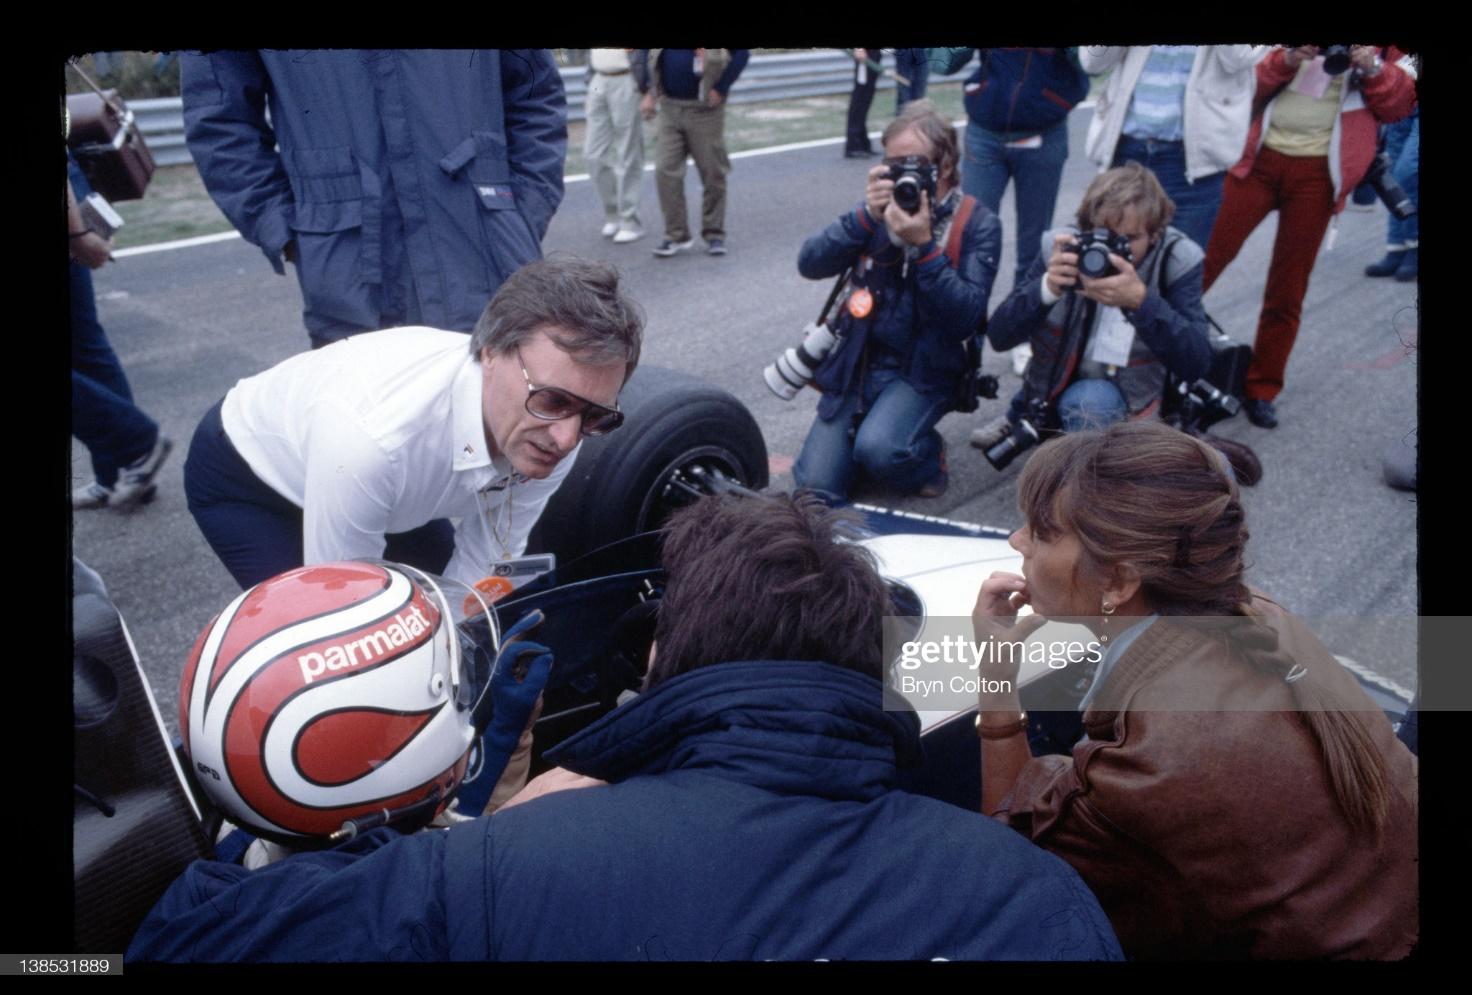 Bernie Ecclestone, owner of the Brabham Grand Prix team, left, talks with Nelson Piquet as he sits in his car on the starting grid for the Dutch Grand Prix as Piquets wife, Sylvia Piquet, right, looks on at the Zandvoort circuit in the Netherlands, on Sunday, August 28, 1983. 